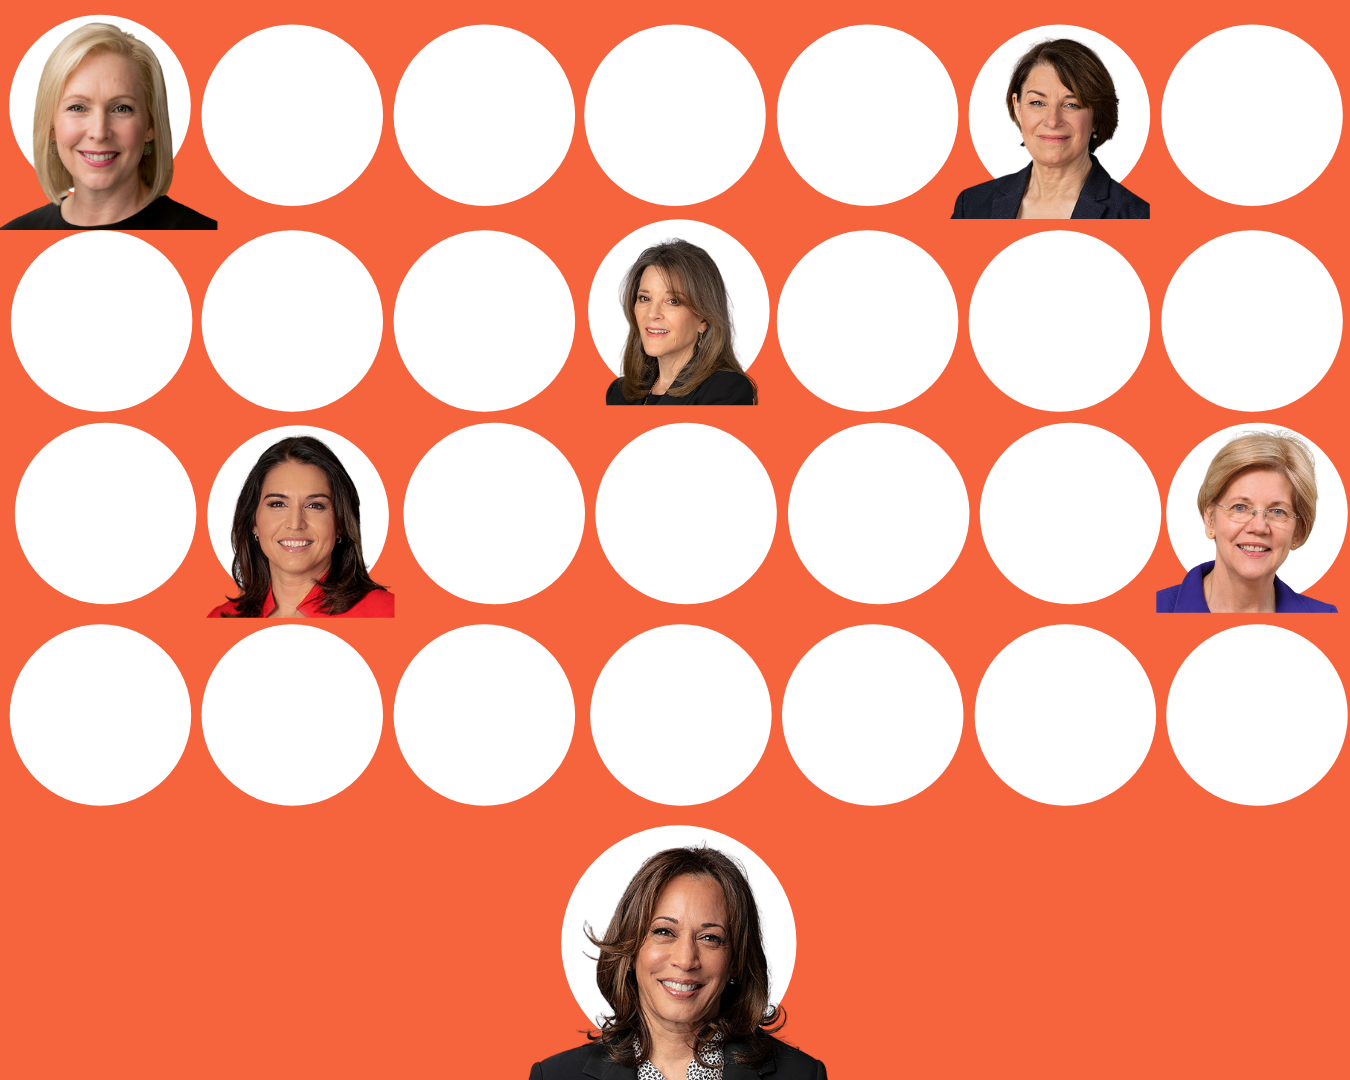 all of the democratic women who ran for president in 2020